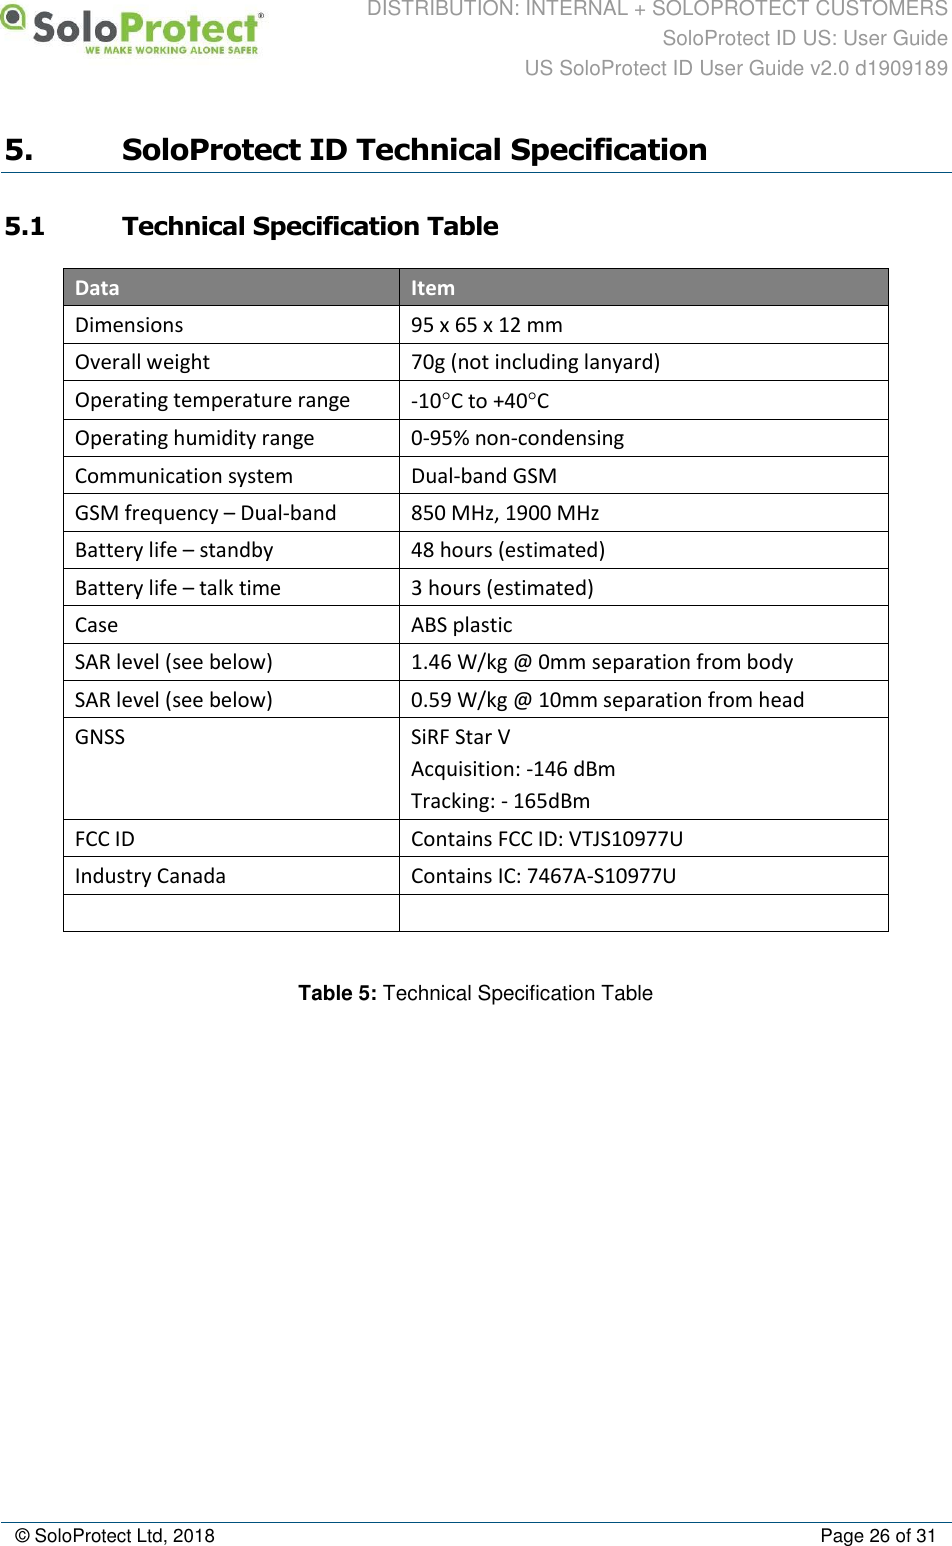 DISTRIBUTION: INTERNAL + SOLOPROTECT CUSTOMERS SoloProtect ID US: User Guide US SoloProtect ID User Guide v2.0 d1909189  © SoloProtect Ltd, 2018  Page 26 of 31 5. SoloProtect ID Technical Specification 5.1 Technical Specification Table Data Item Dimensions 95 x 65 x 12 mm Overall weight 70g (not including lanyard) Operating temperature range -10C to +40C Operating humidity range 0-95% non-condensing Communication system Dual-band GSM GSM frequency – Dual-band 850 MHz, 1900 MHz  Battery life – standby 48 hours (estimated) Battery life – talk time 3 hours (estimated) Case ABS plastic SAR level (see below) 1.46 W/kg @ 0mm separation from body SAR level (see below) 0.59 W/kg @ 10mm separation from head GNSS SiRF Star V  Acquisition: -146 dBm Tracking: - 165dBm FCC ID Contains FCC ID: VTJS10977U Industry Canada Contains IC: 7467A-S10977U      Table 5: Technical Specification Table  